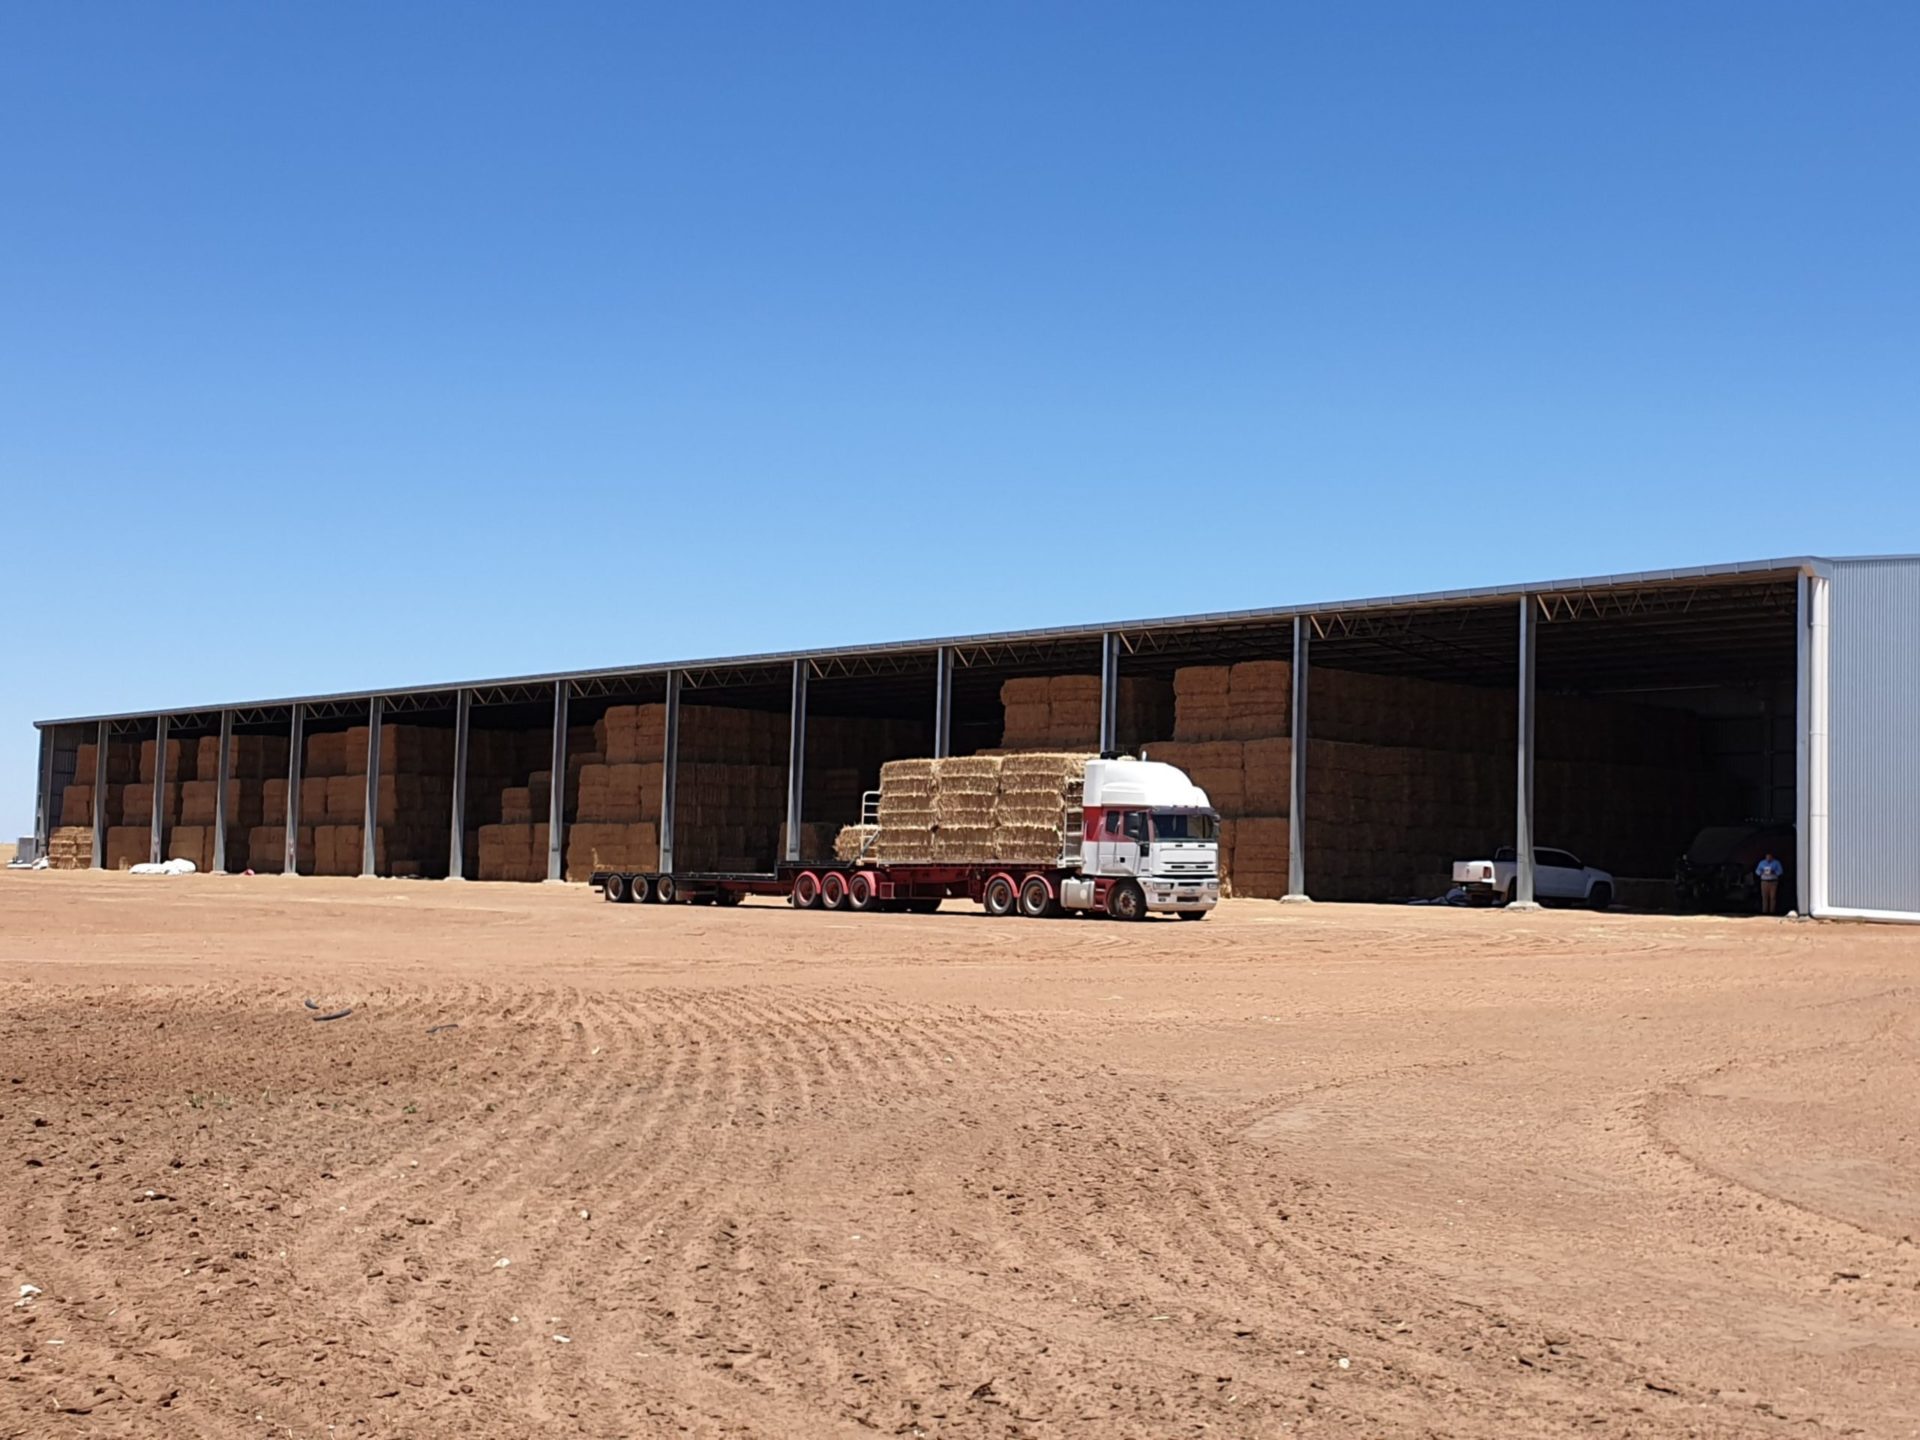 You are currently viewing 126m x 27m x 9m hay shed